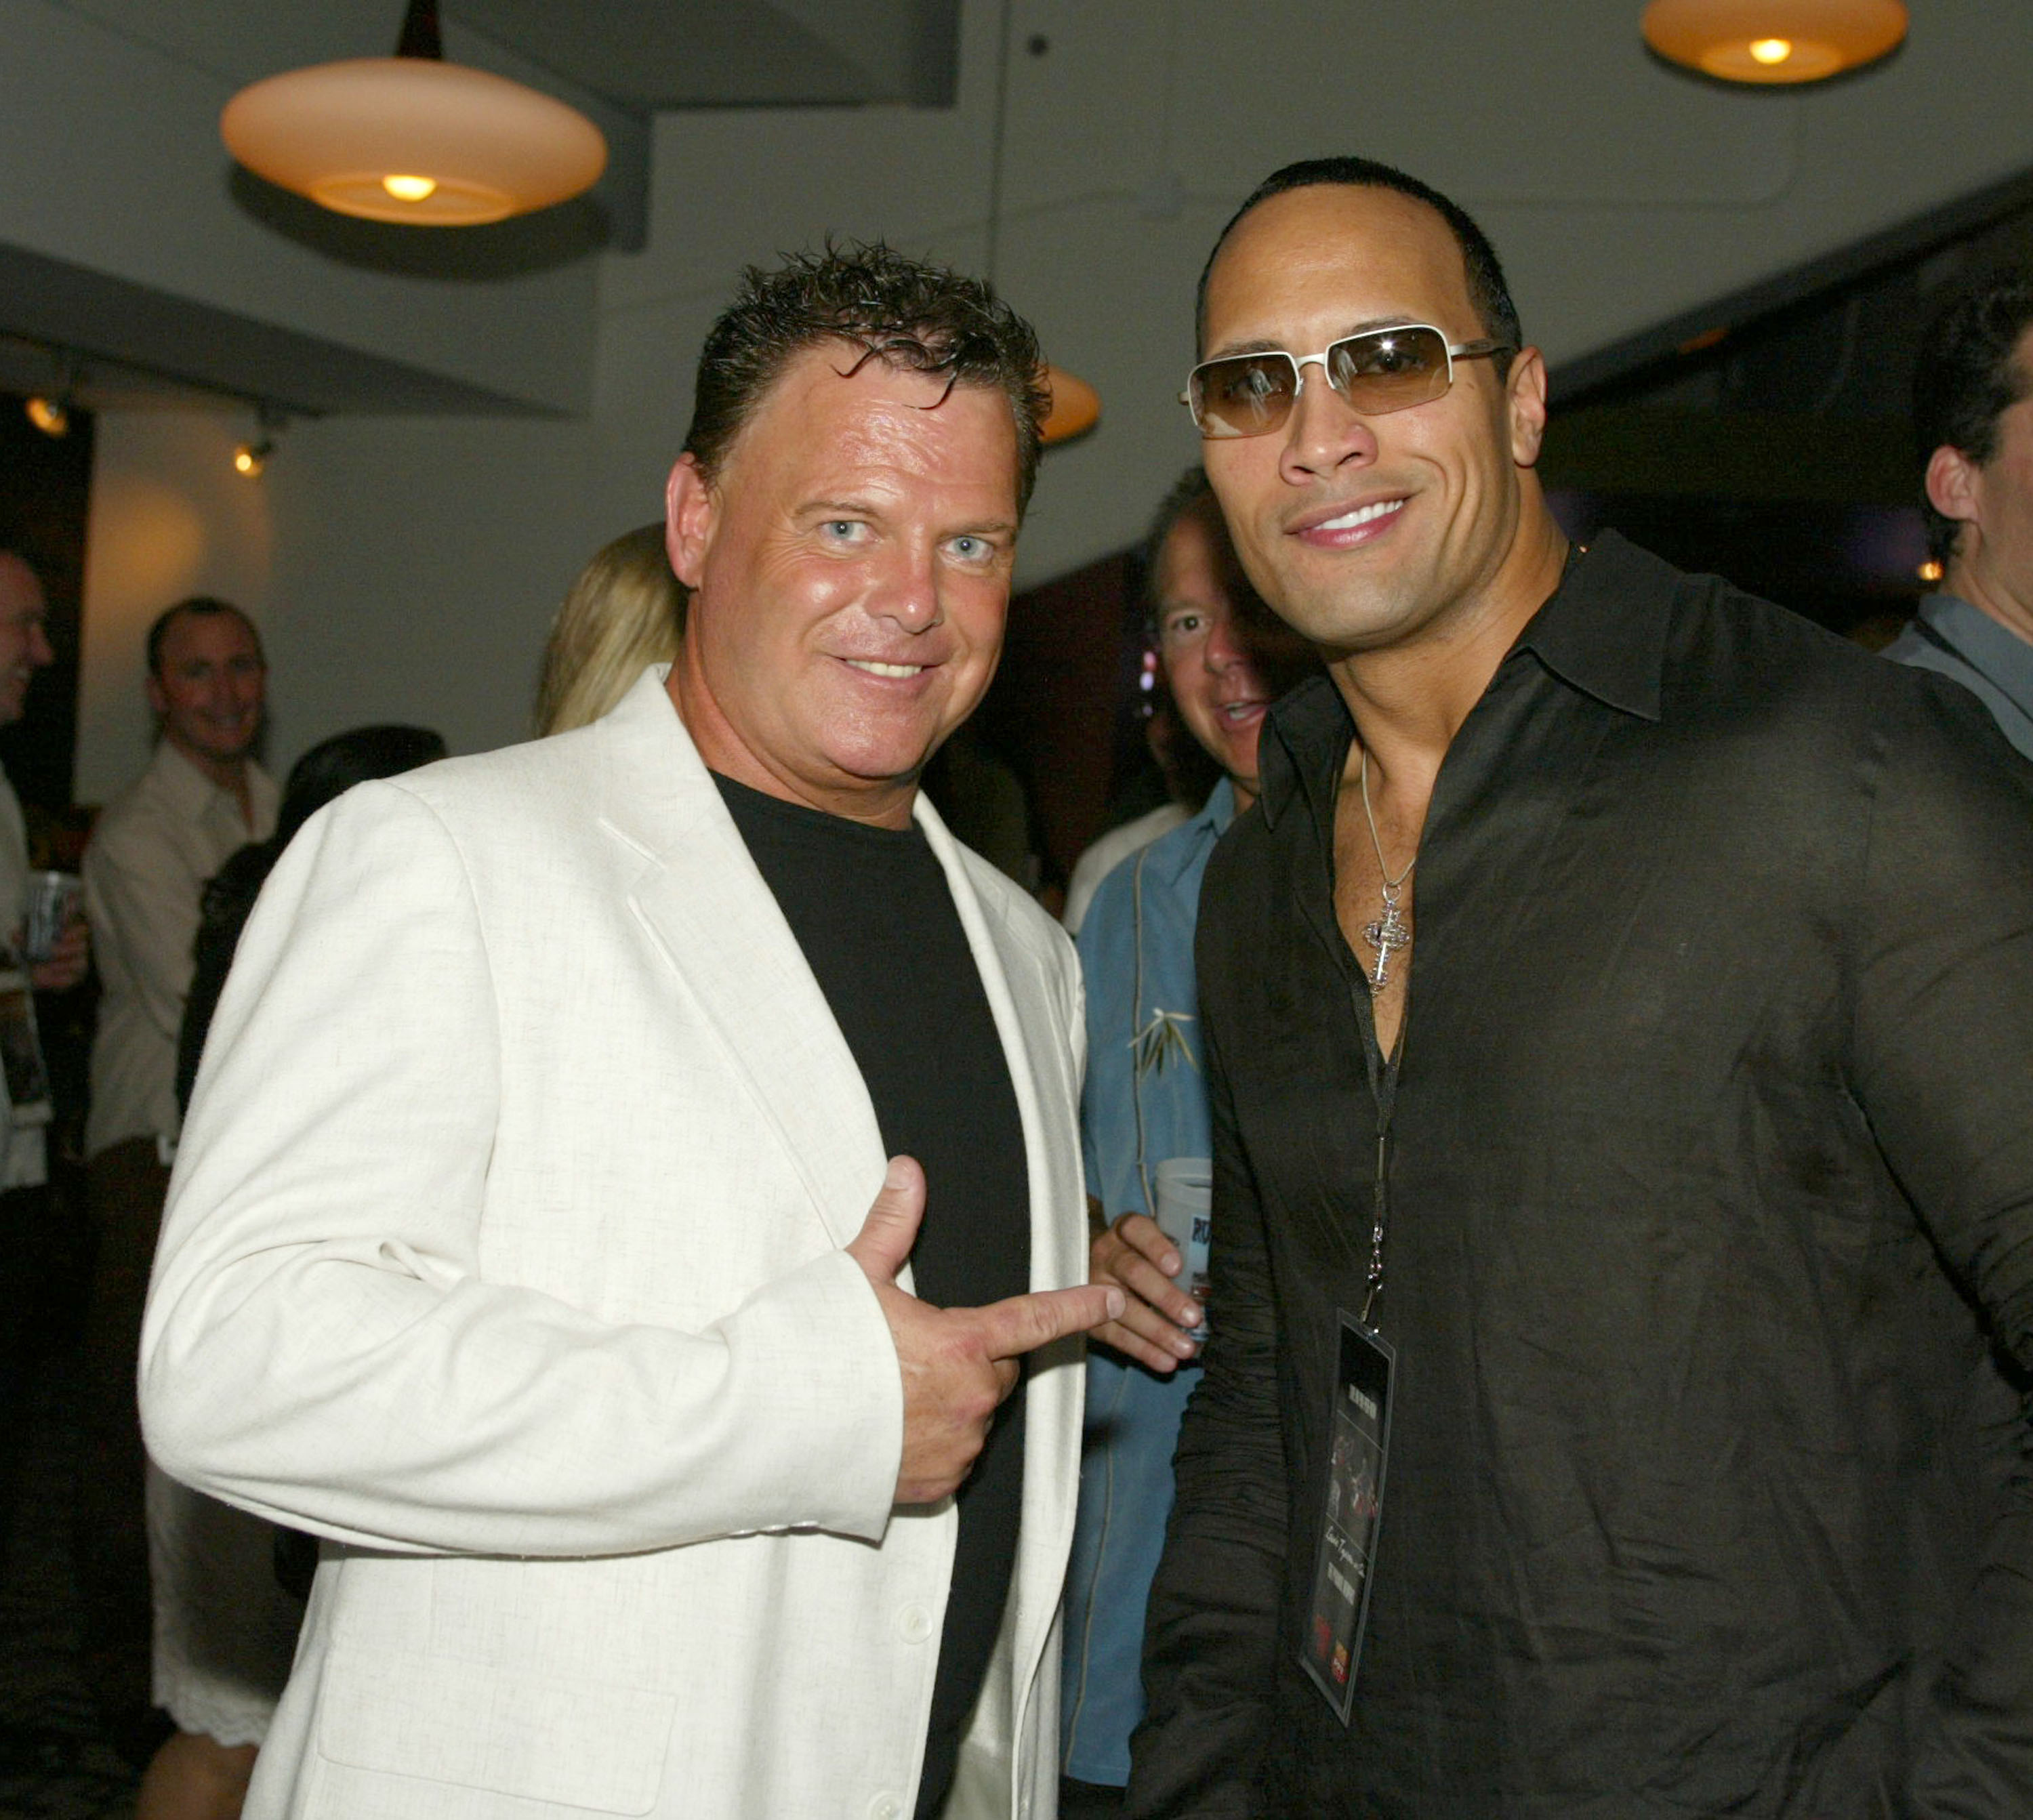 Jerry Lawler & The Rock